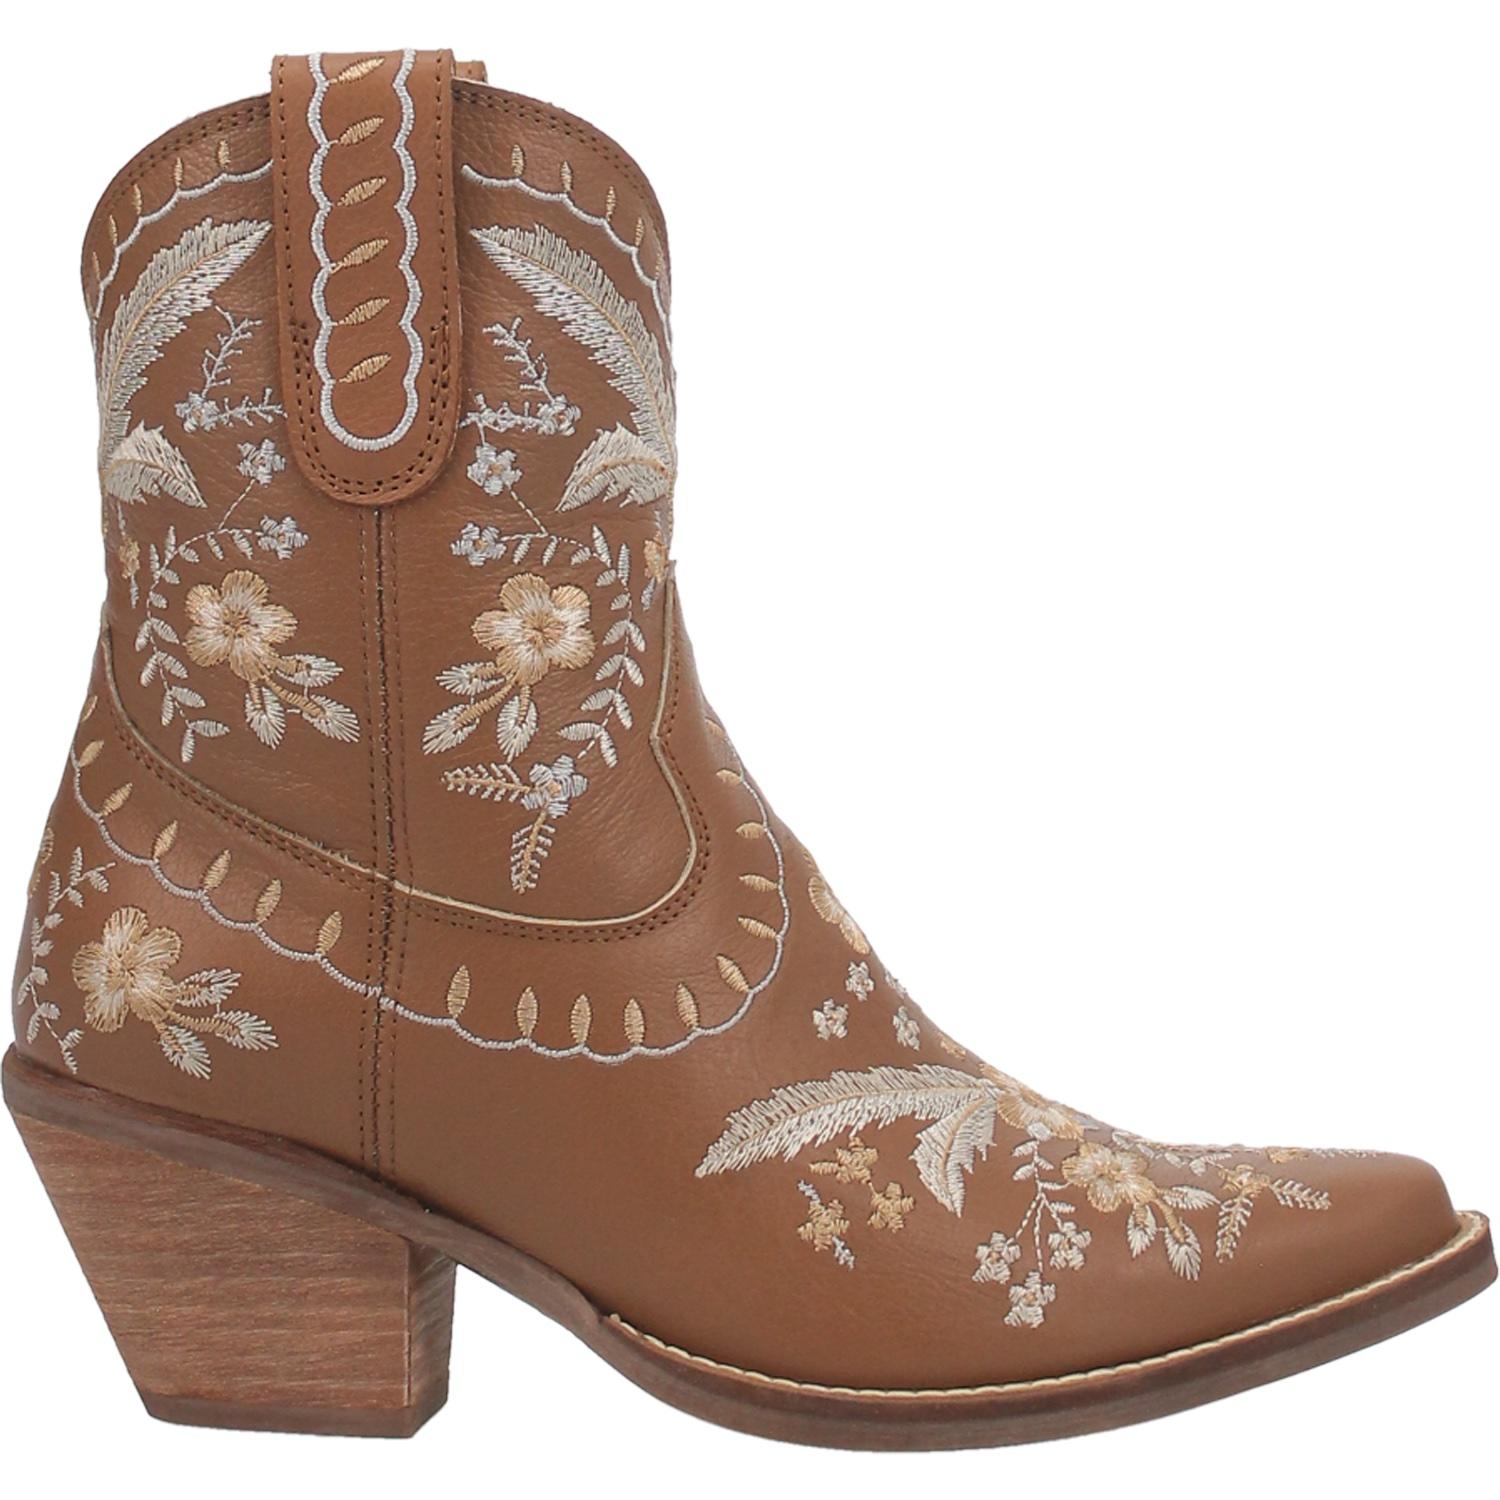 Primrose Brown Leather Boots w/ Stitched Floral Designs (DS)